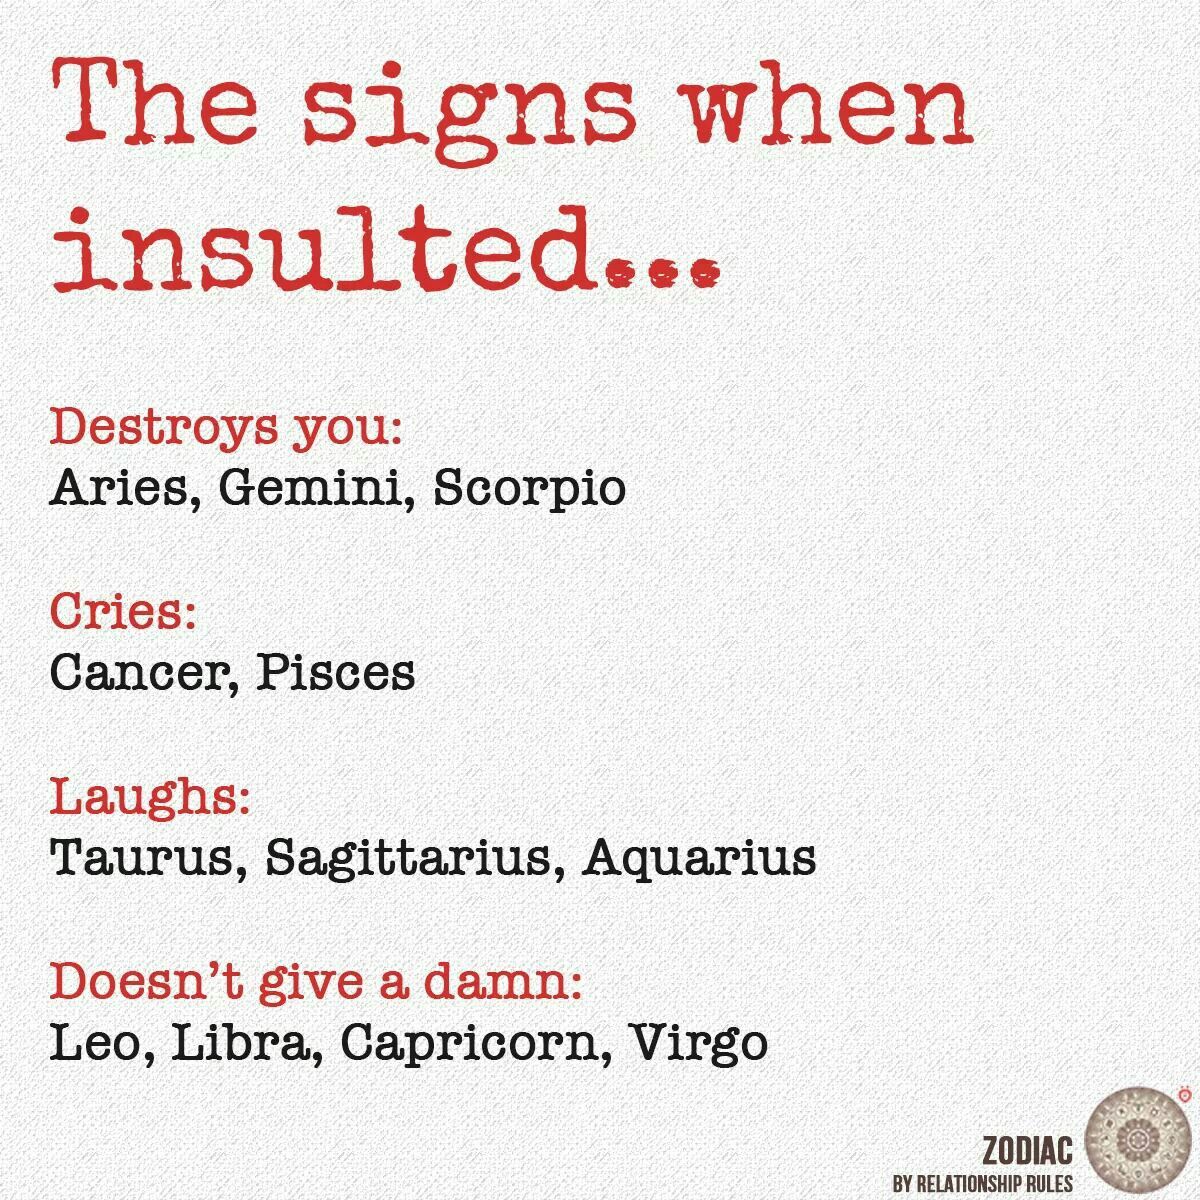 I don't give a double damn and some crying. Lol - Zodiac Memes